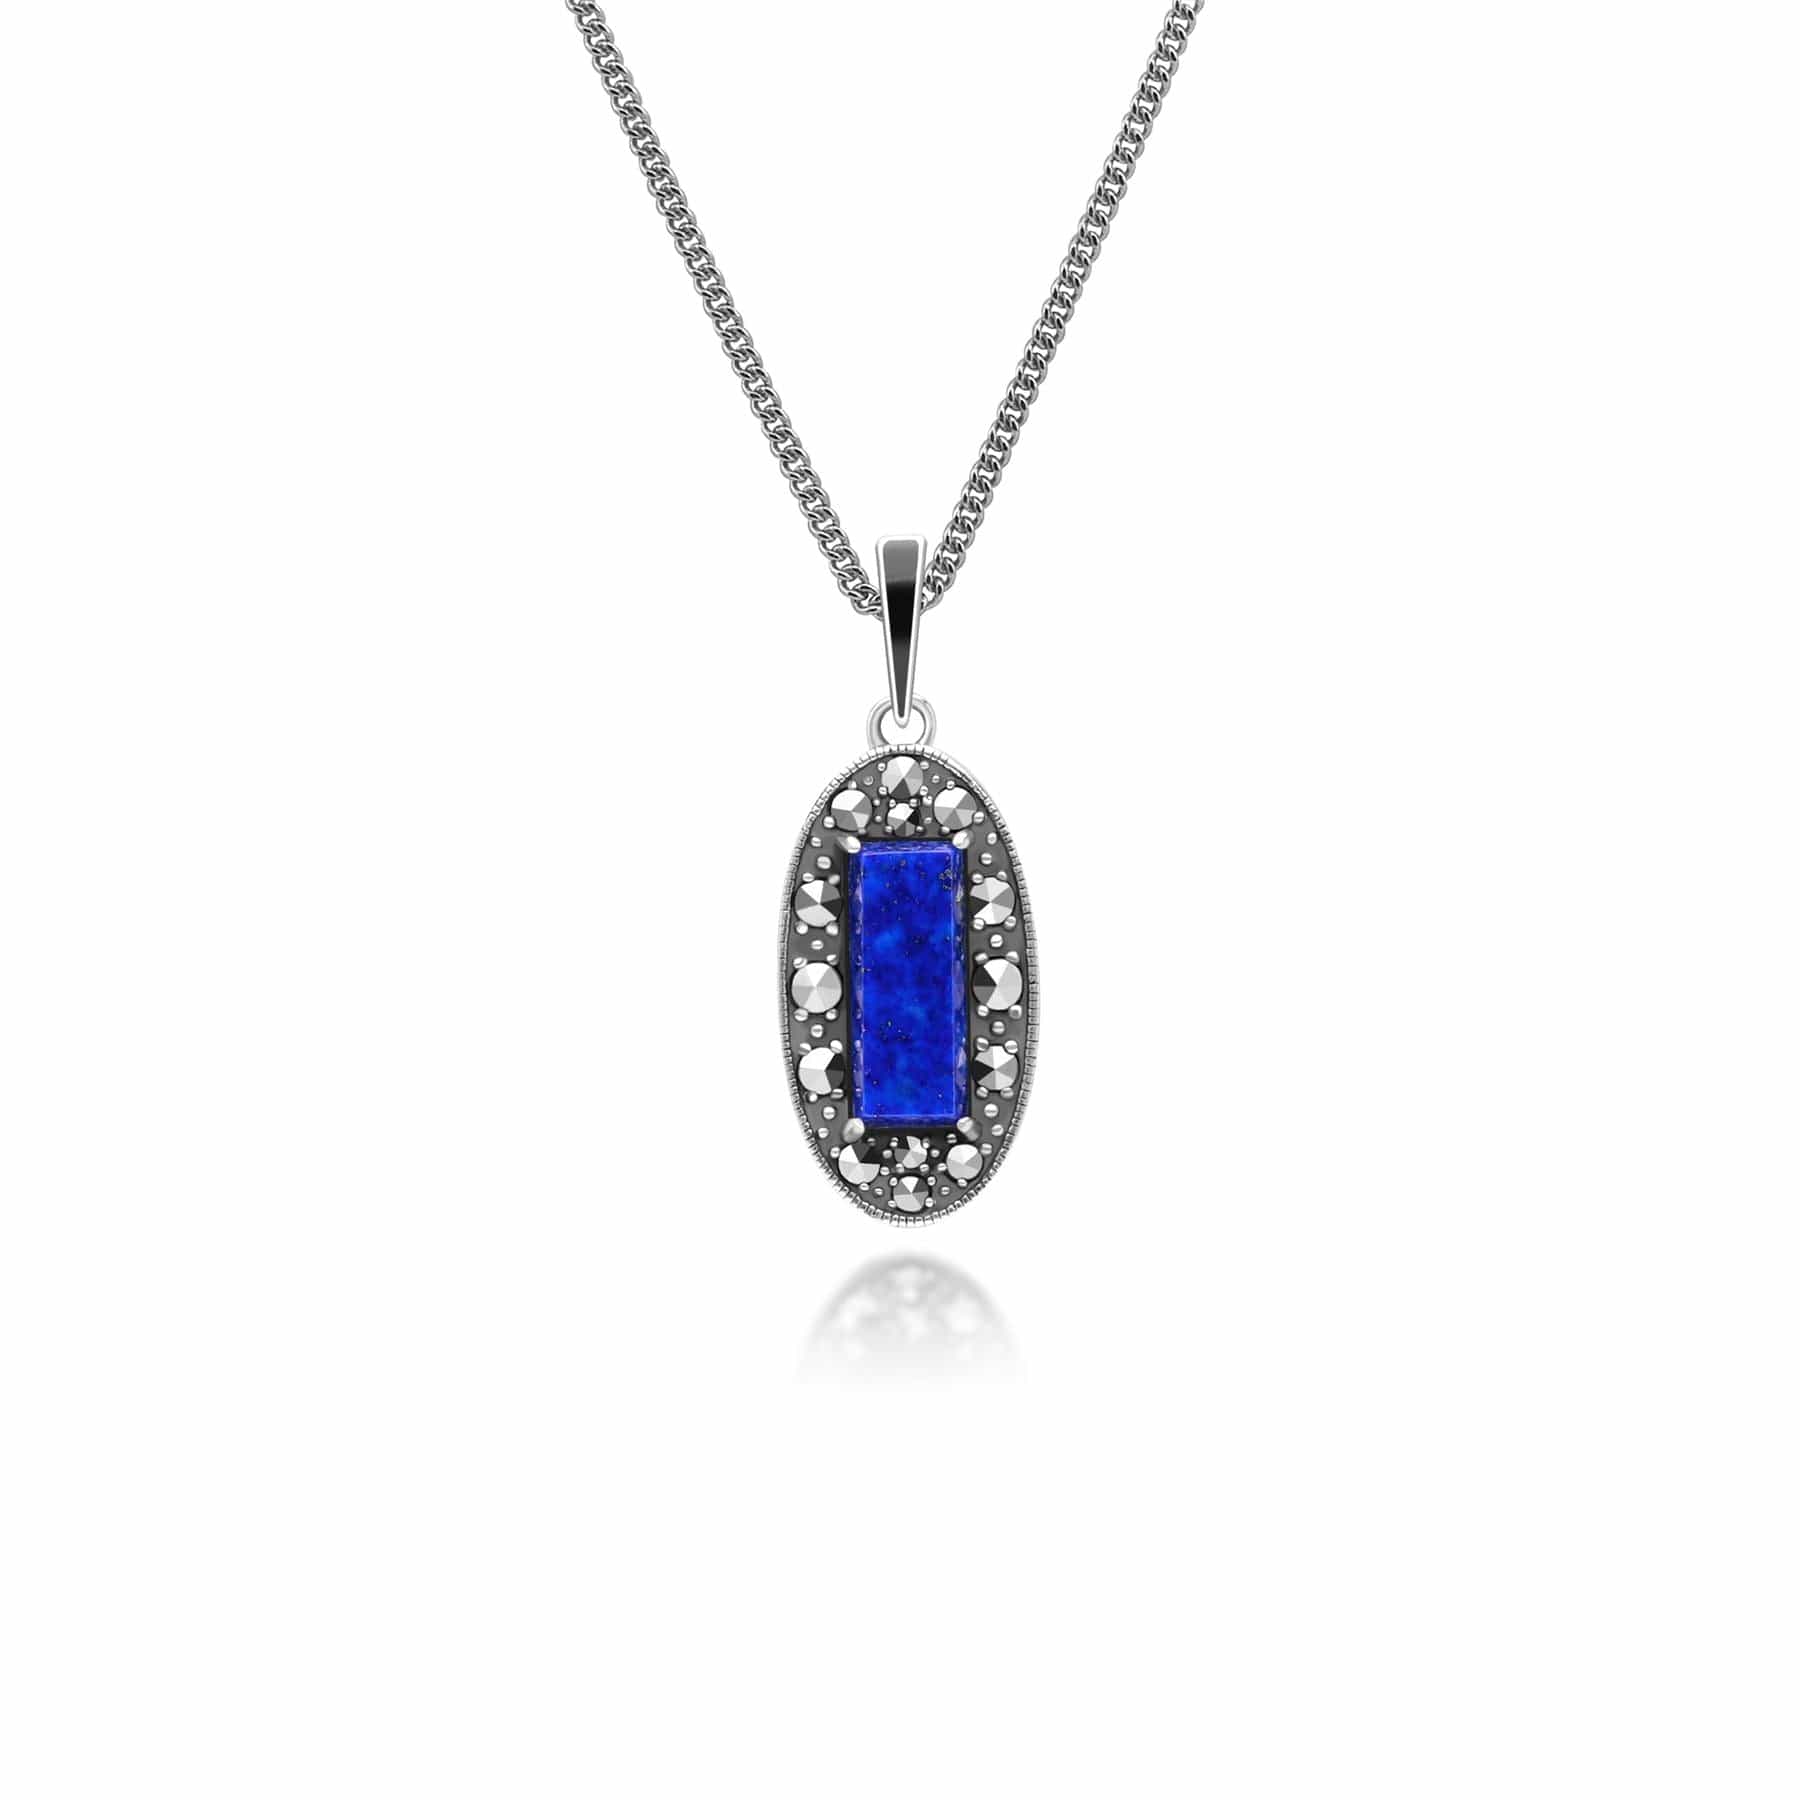 Art Deco Style Oval Lapis Lazuli, Marcasite and Black Enamel Pendant Necklace in Sterling Silver 214P334401925 